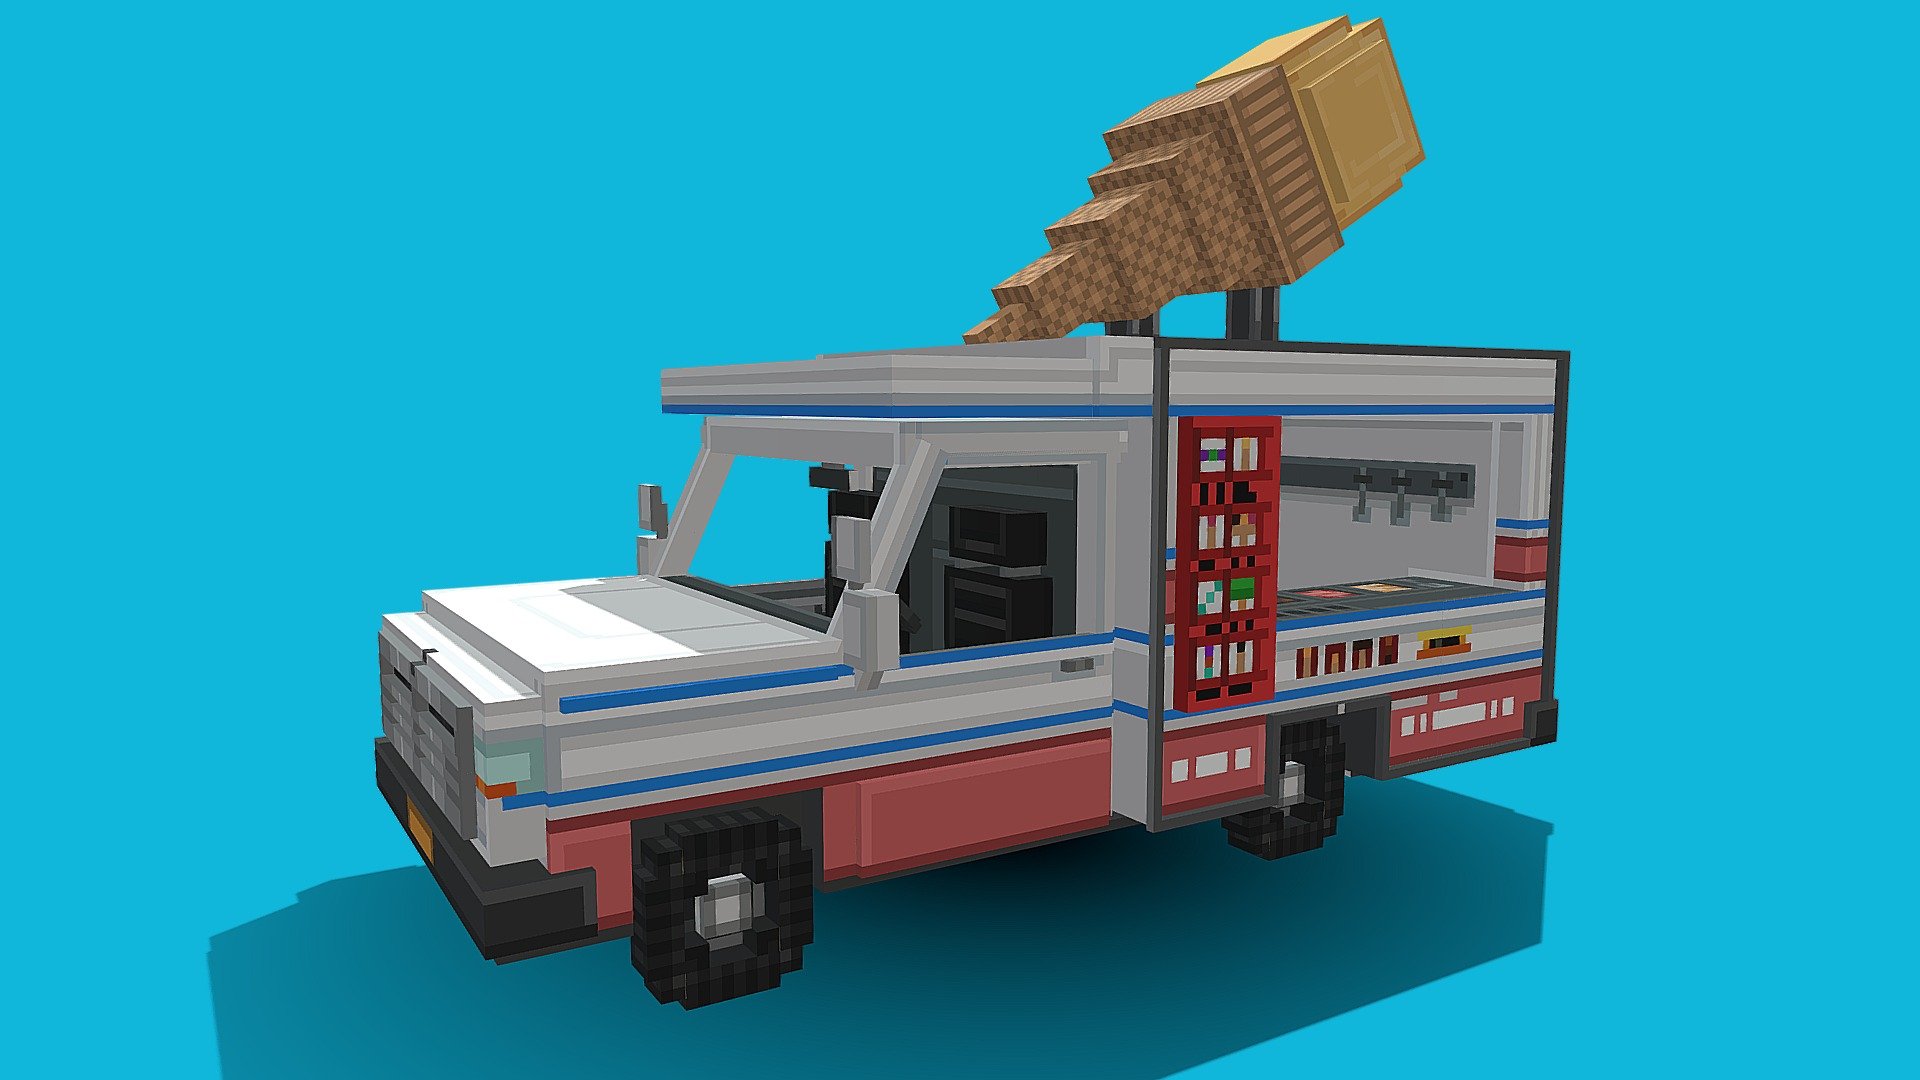 This ice-cream truck, complete with a 3D cone on its roof, is equipped with double freezer boxes, and tubs of ice cream flavours on the countertop


About the Project



Modelled and Textured by Sam McLaughlin (Bhuna)

Made in Blockbench




Contact Me
Available for Marketplace or Minecraft work





Follow me on twitter




Contact me on Discord: Sam McLaughlin#4095


 - Ice Cream Van - 3D model by Sam McLaughlin (@BhunaBoy) 3d model